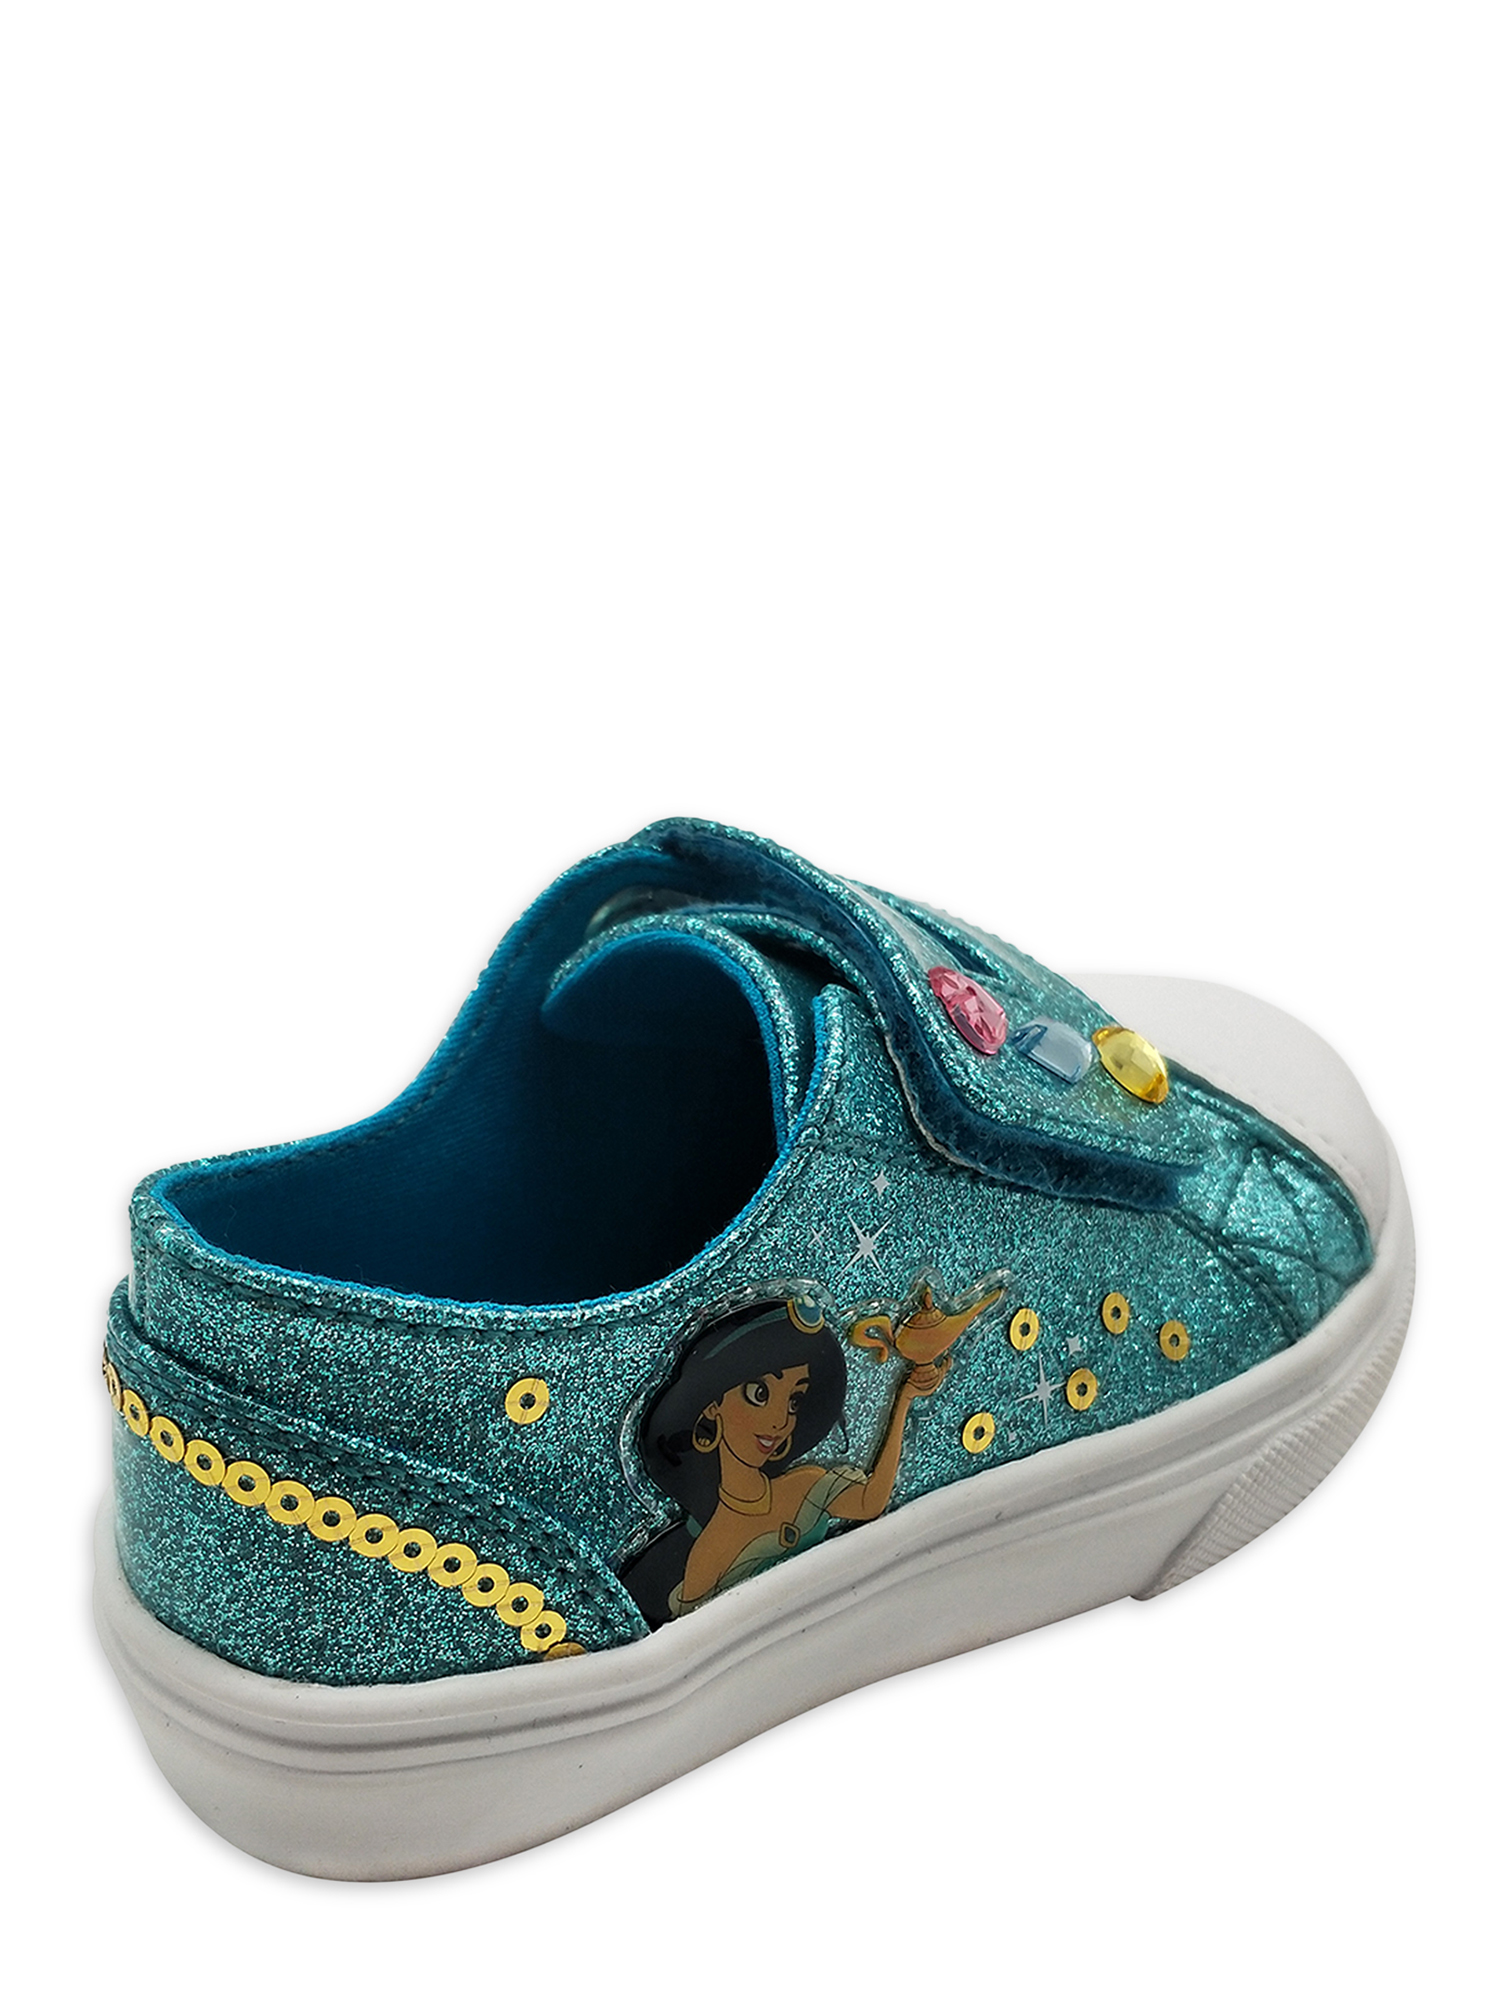 Disney Toddler Girls Aladdin Strap Casual Sneakers, Sizes 7-12 - image 5 of 6